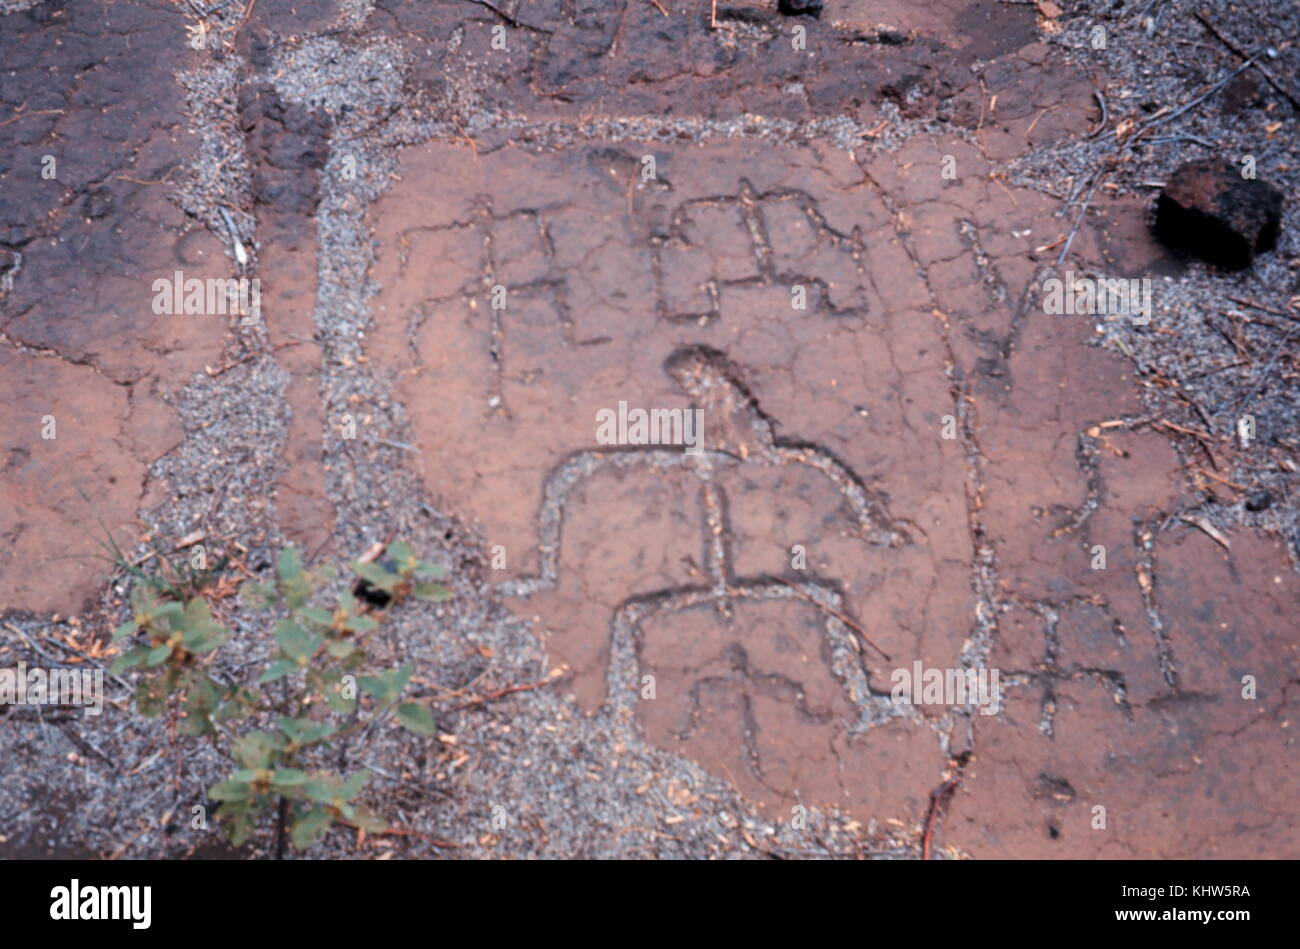 Photograph of Petroglyphs in Hawaii. Petroglyphs are images created by removing part of a rock surface by incising, picking, carving, or abrading, as a form of rock art. Dated 20th Century Stock Photo